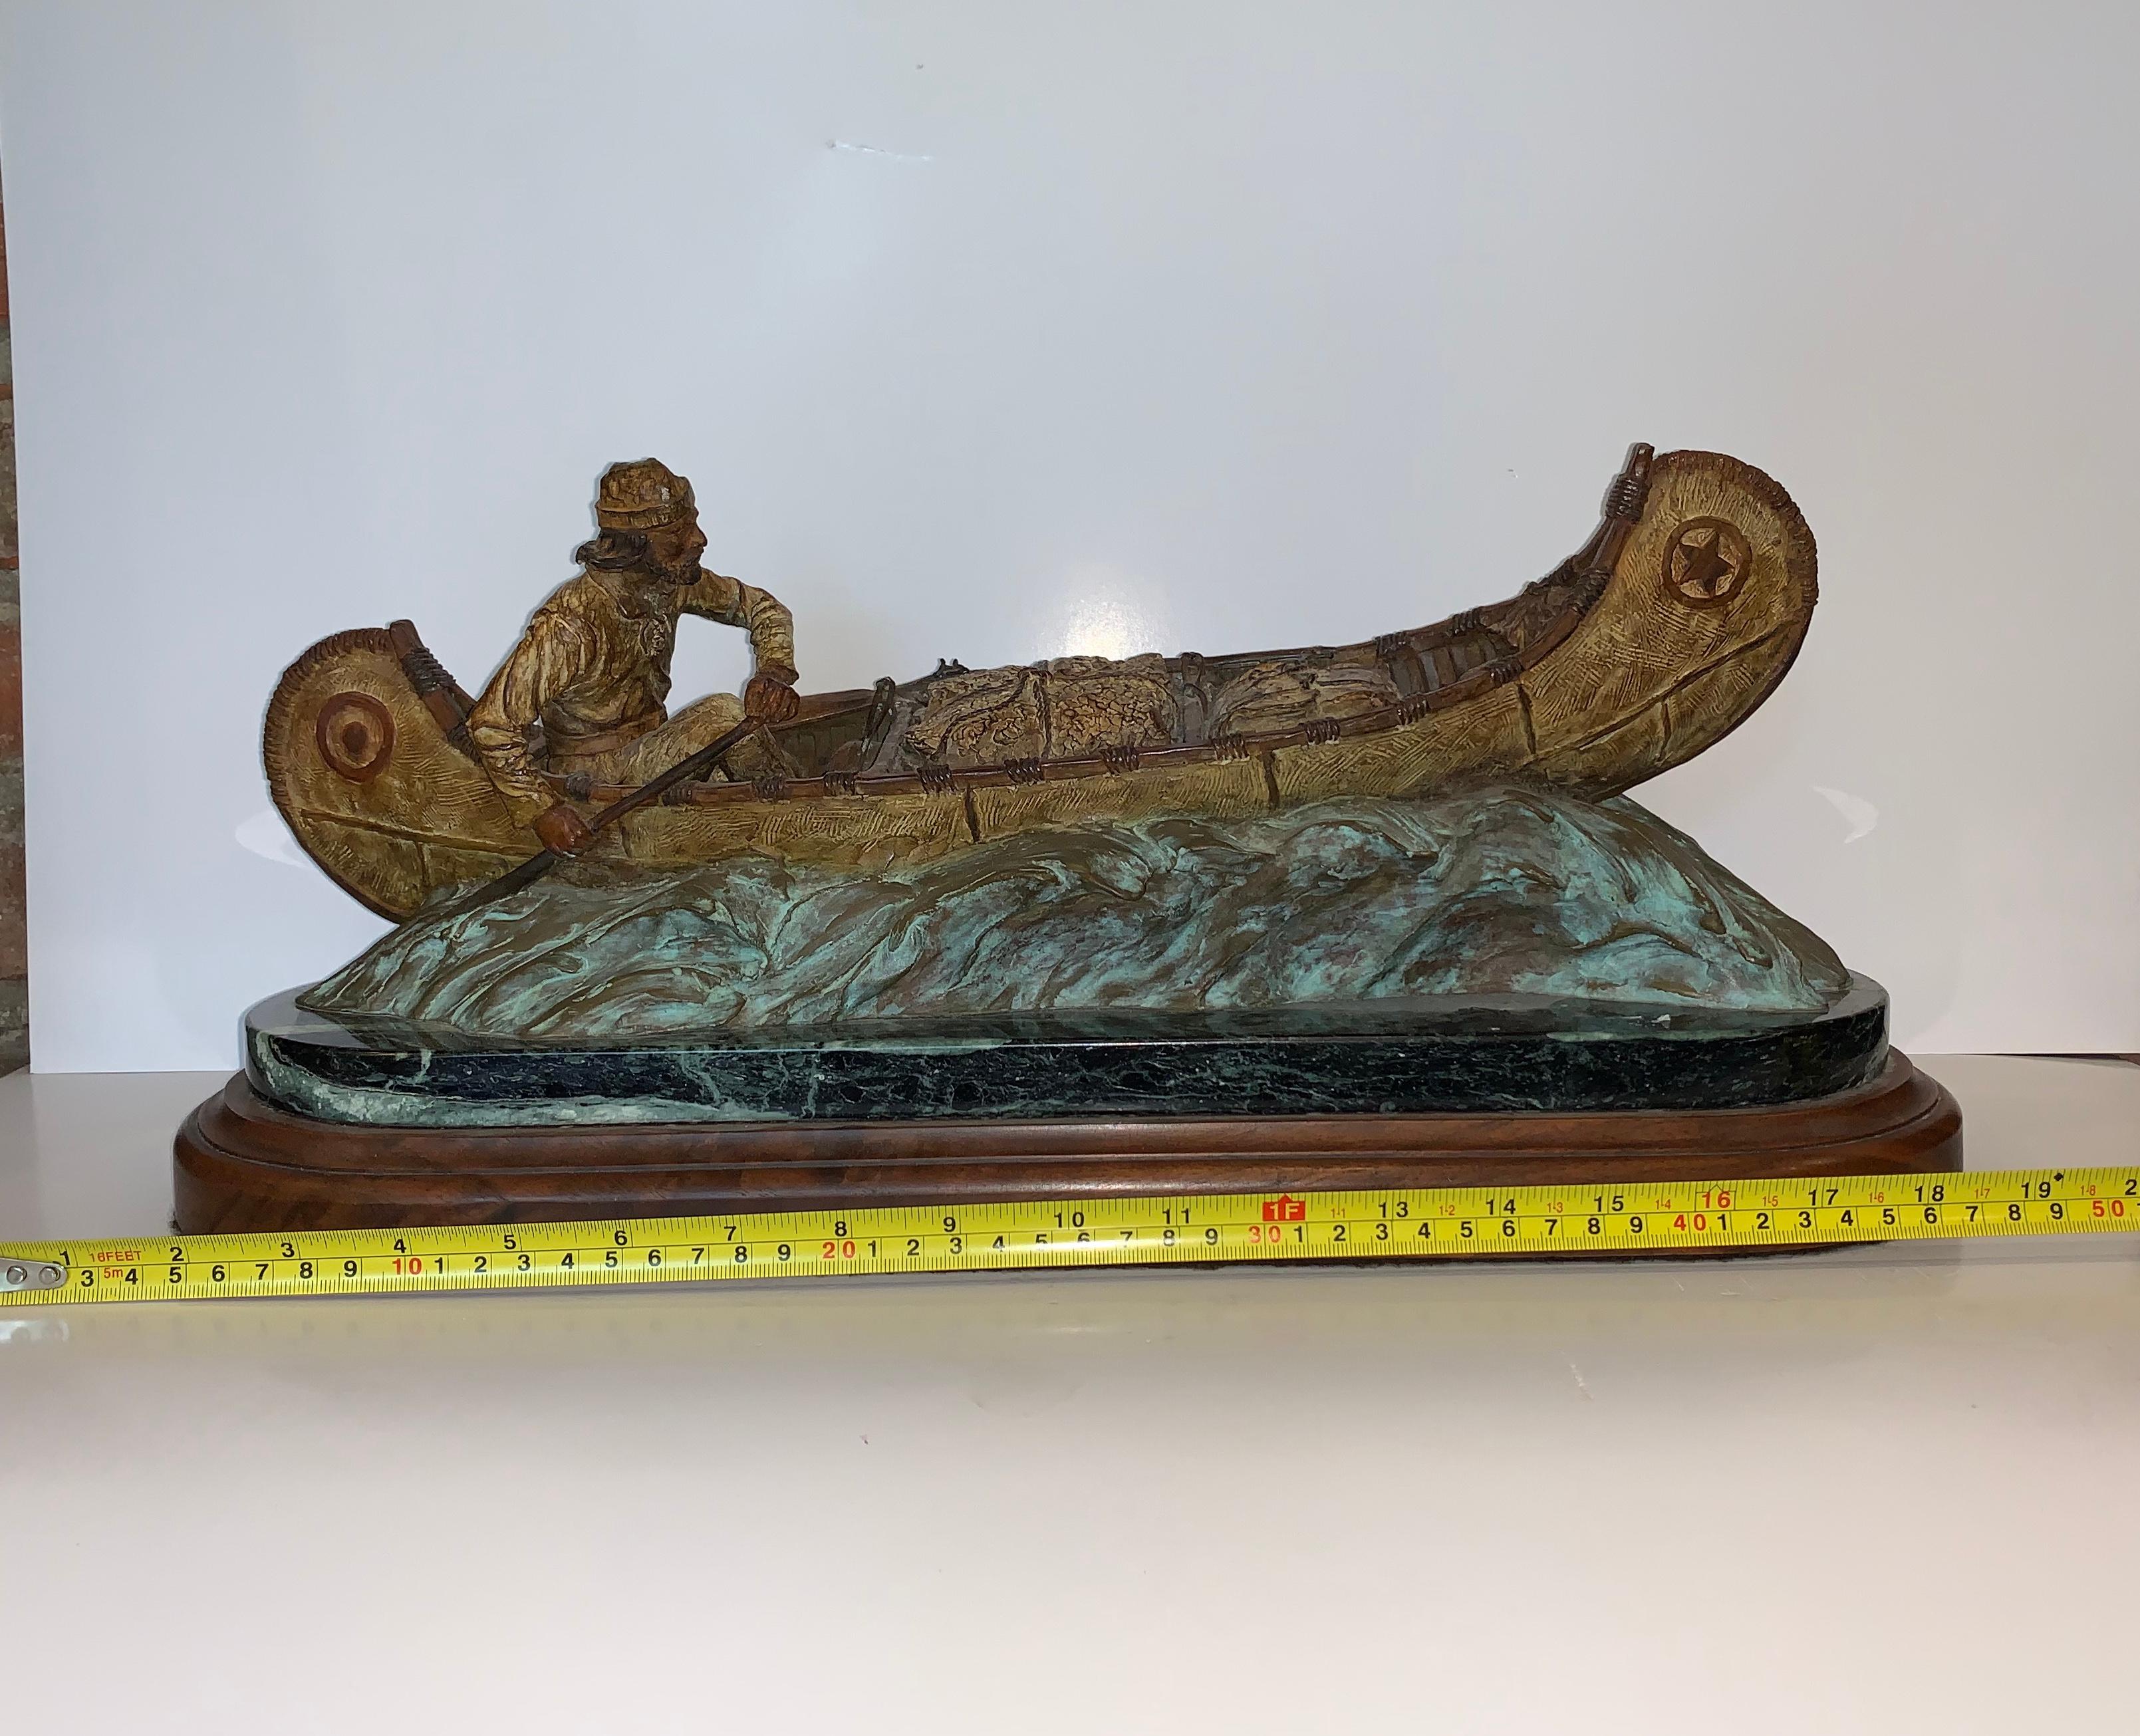 Bill Nebeker (Born 1942) is a prolific Artist from Idaho Living in Arizona.  The bronze up for sale is a gorgeous finely casted American Indian in a canoe.  If you have ever seen a cold painted bronze, this one for sure is a fine example!

